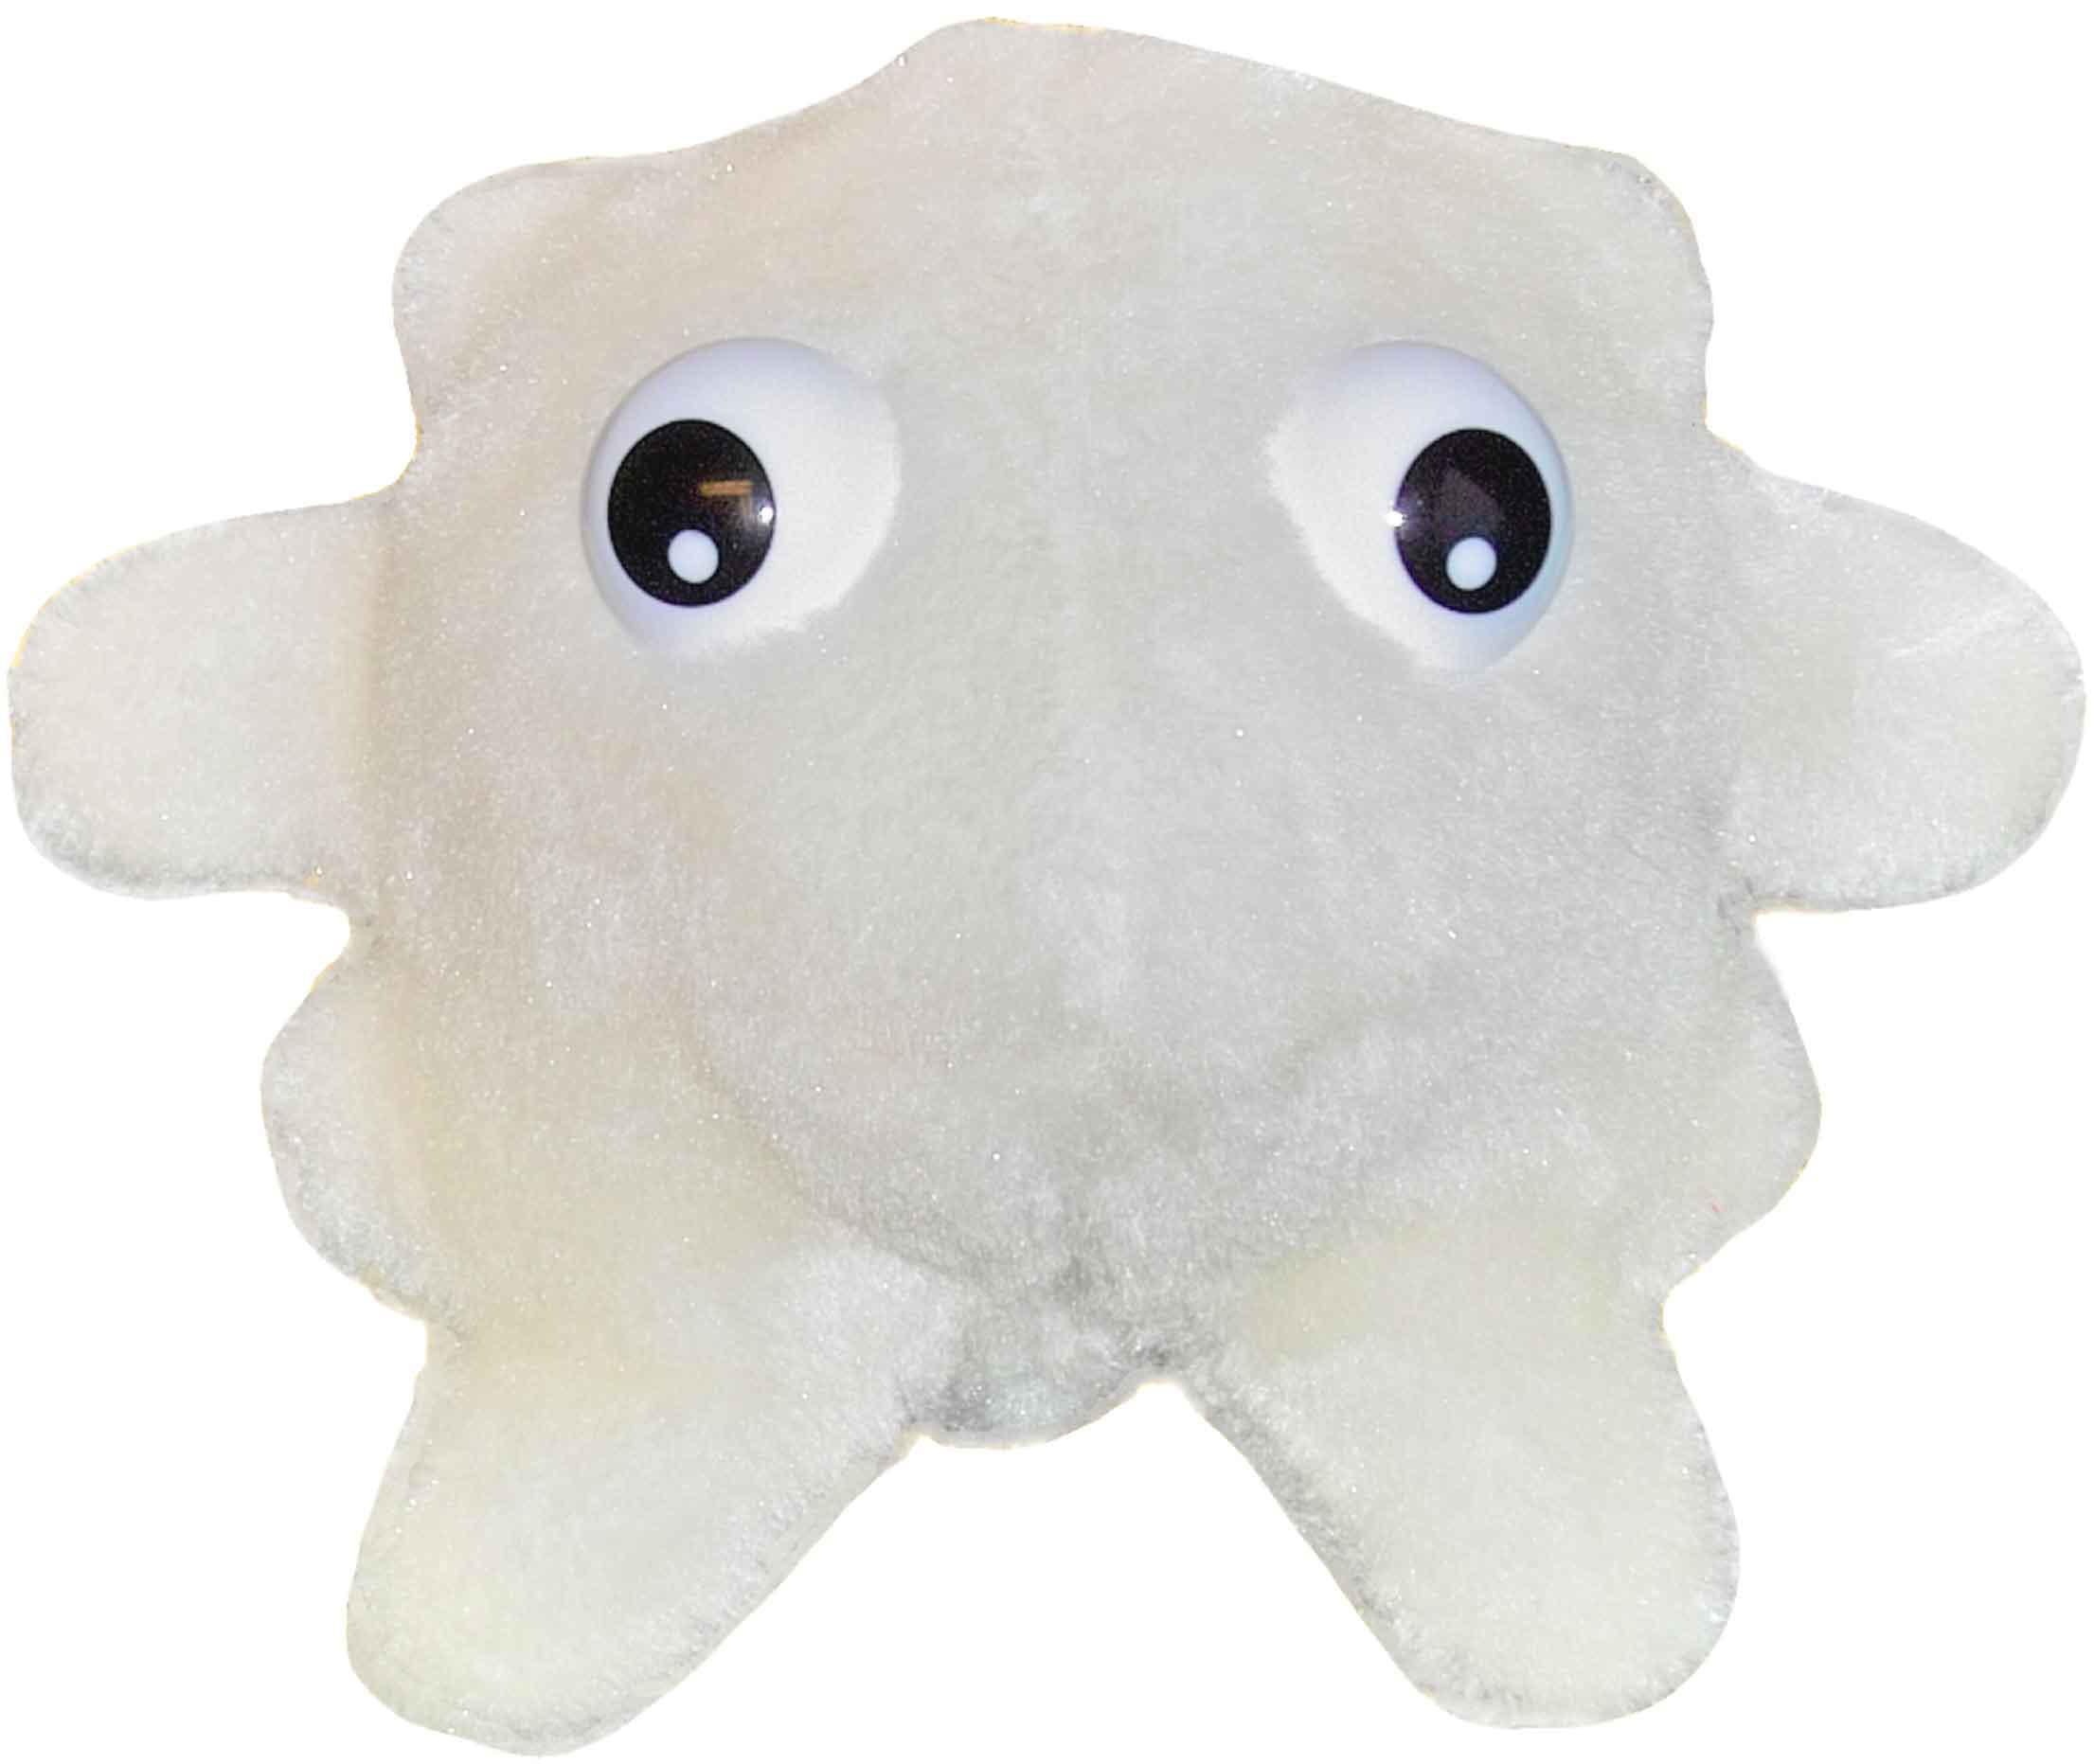 Knick Knack Toy Shack Giant Microbes Plush Toys for kids - White Blood Cell  (Leukocyte) 